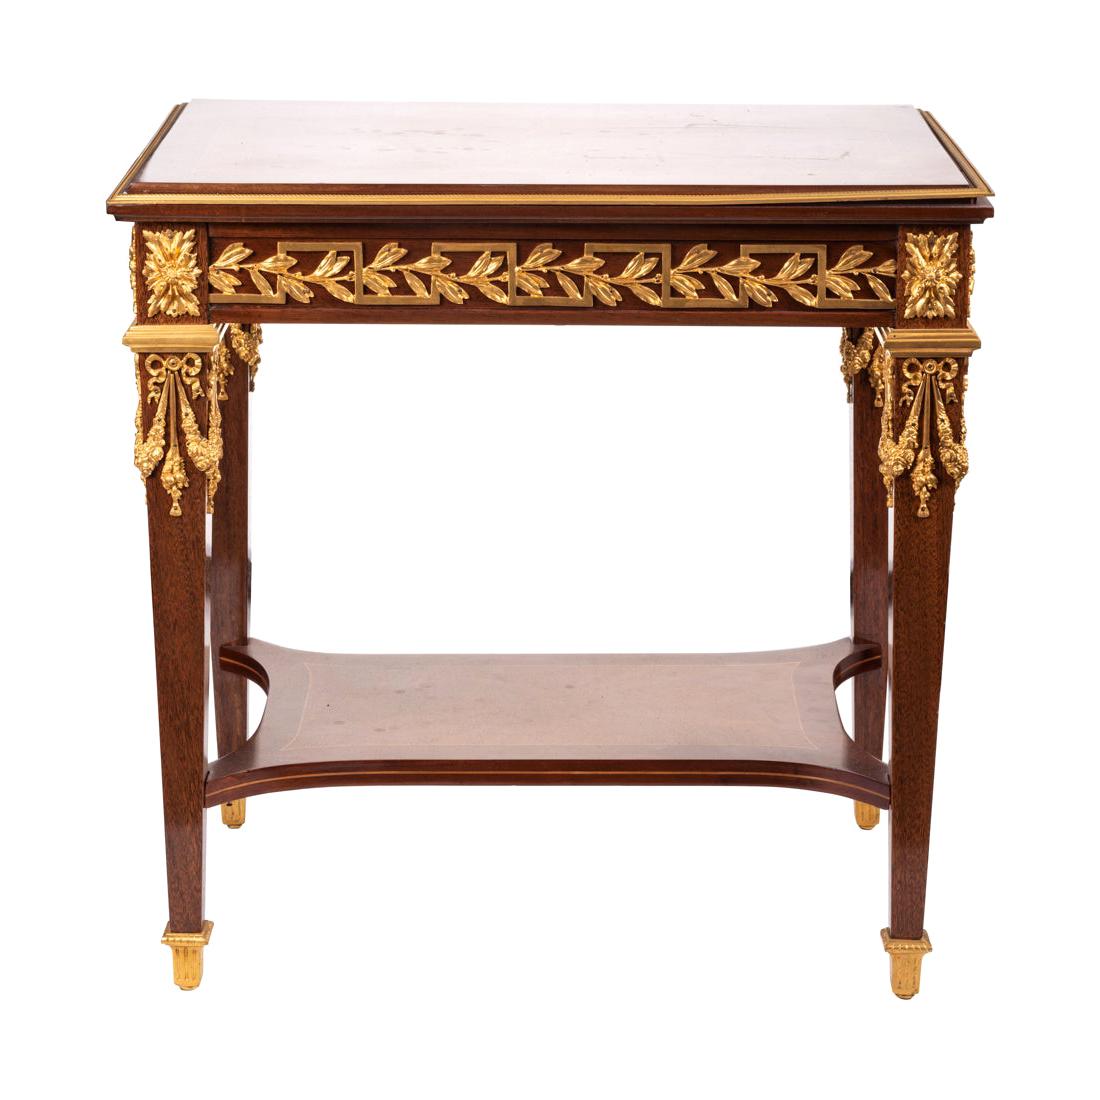 Louis XVI Style Table in Solid Amaranth with Gilt Bronze Mounts